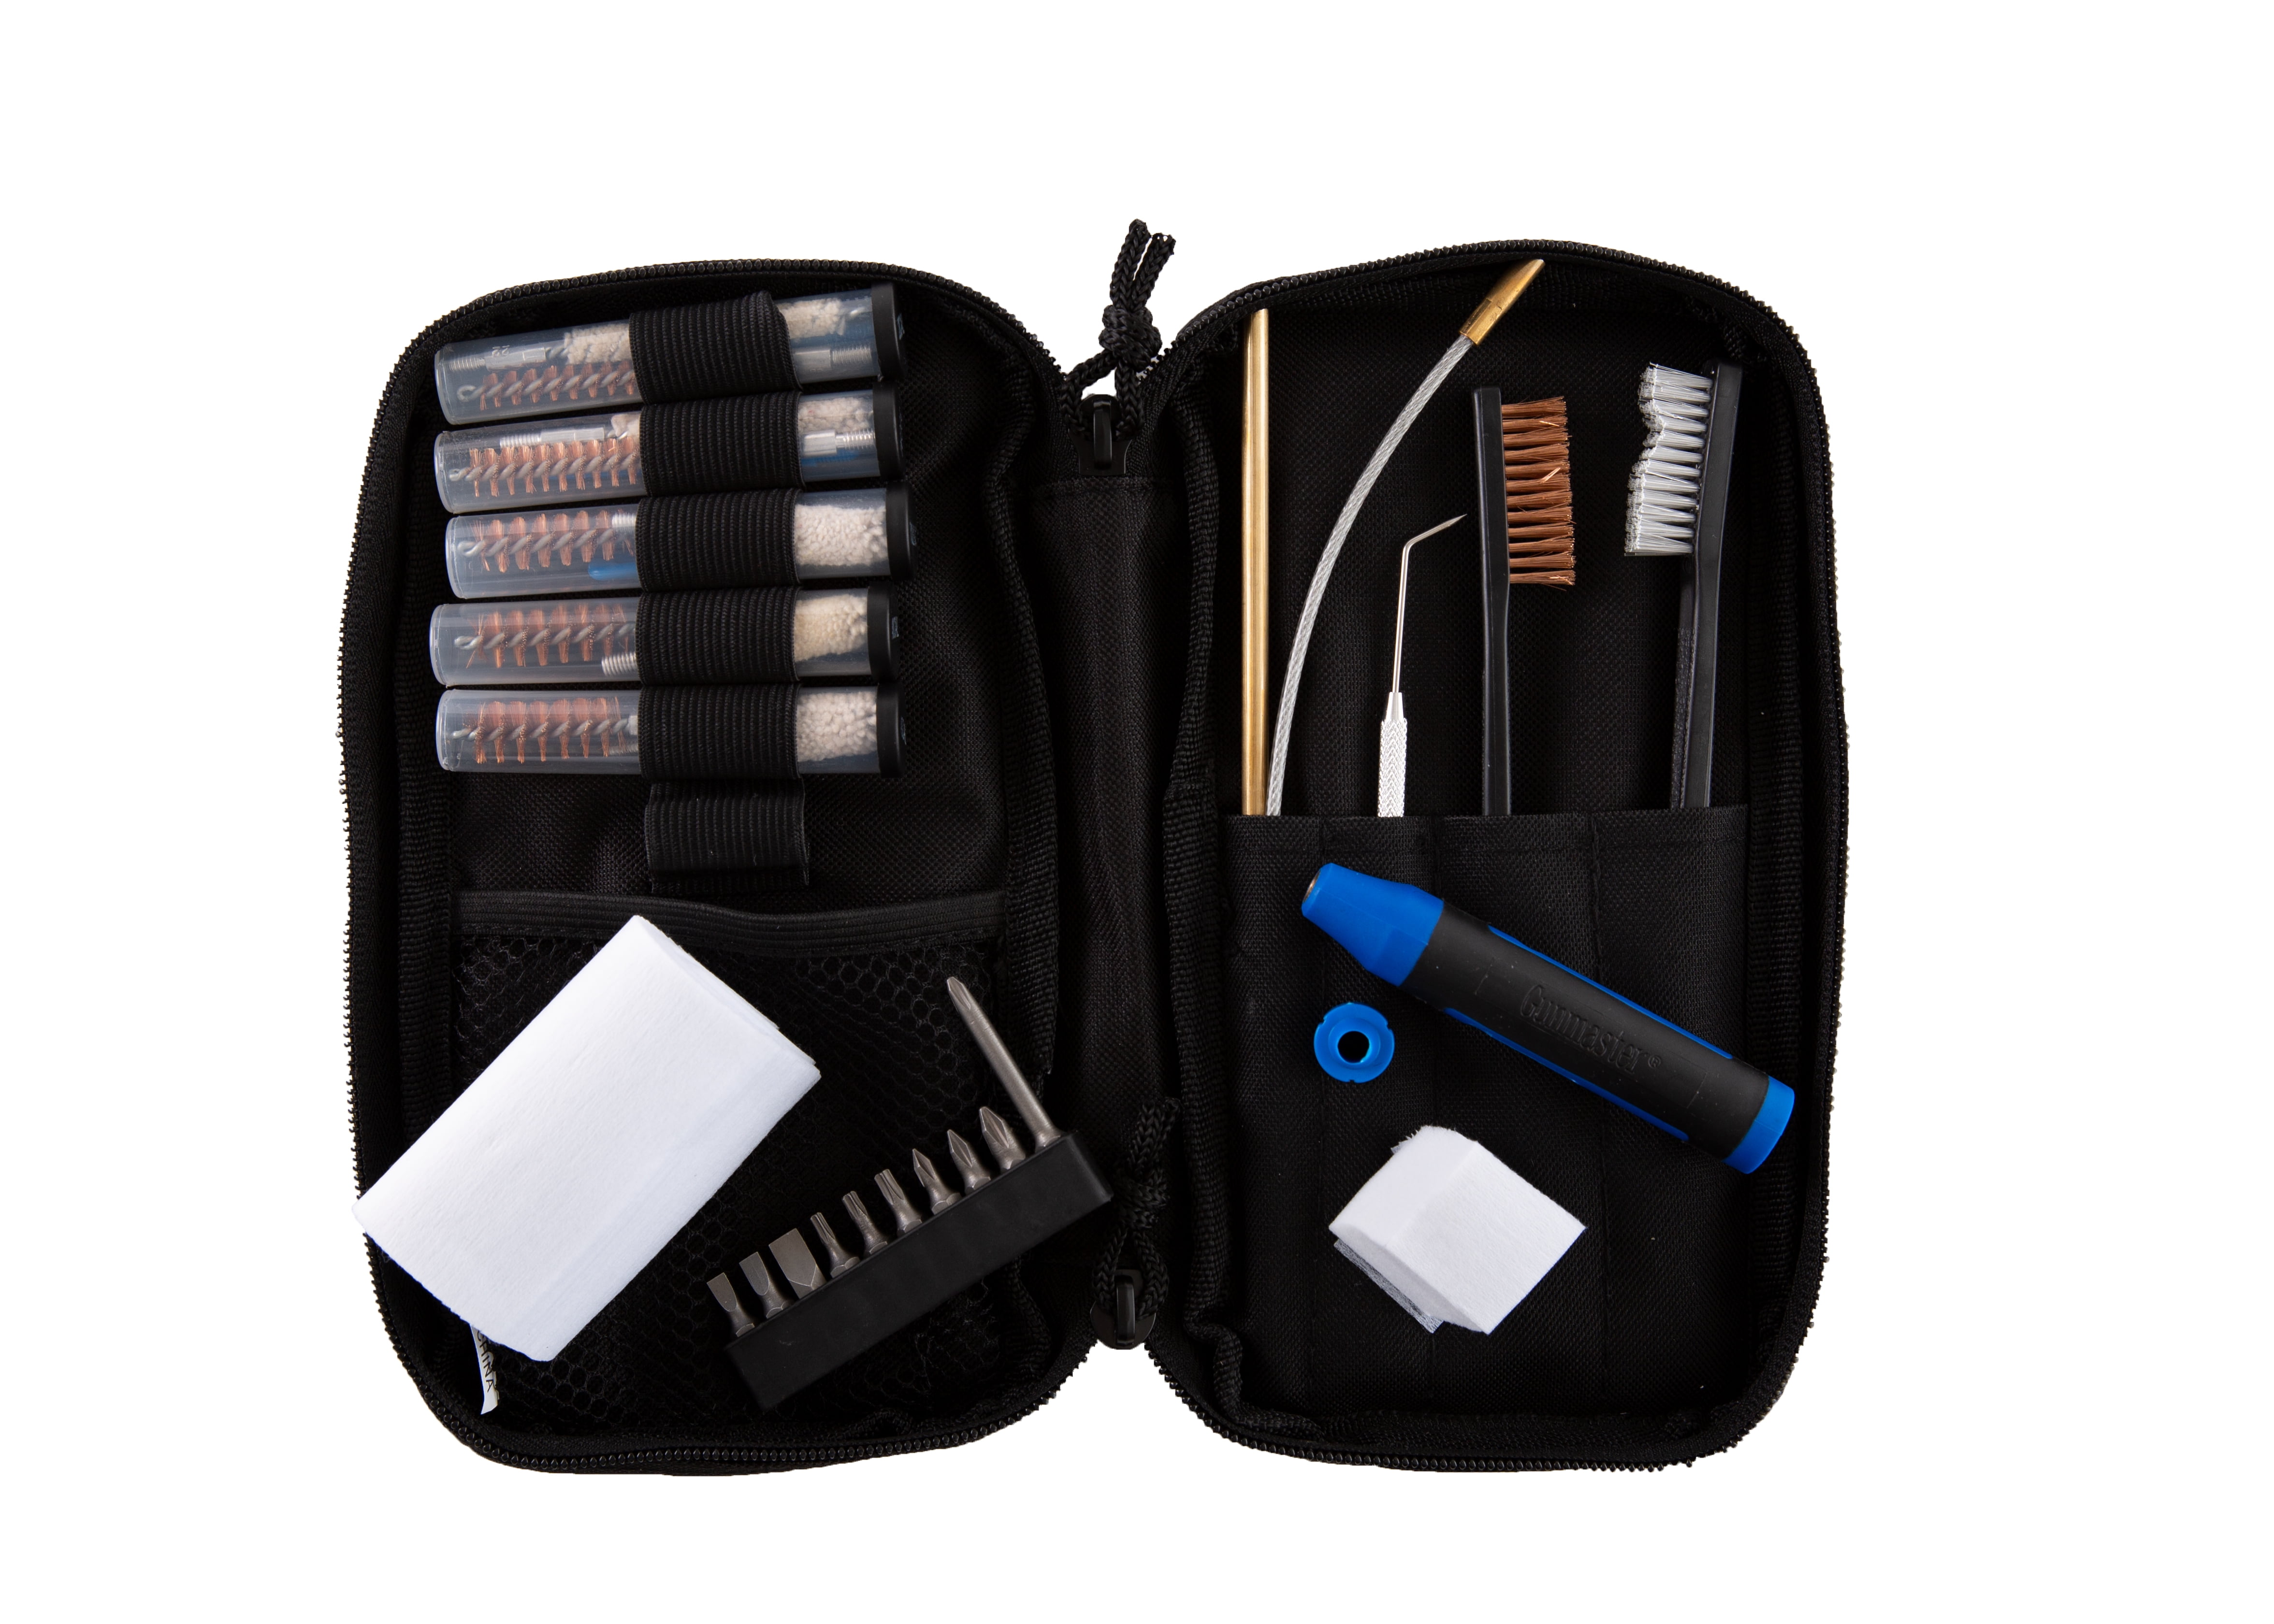 Field Cleaning Kit for guns rifle or pistol shotgun Zipped Pouch Travel 